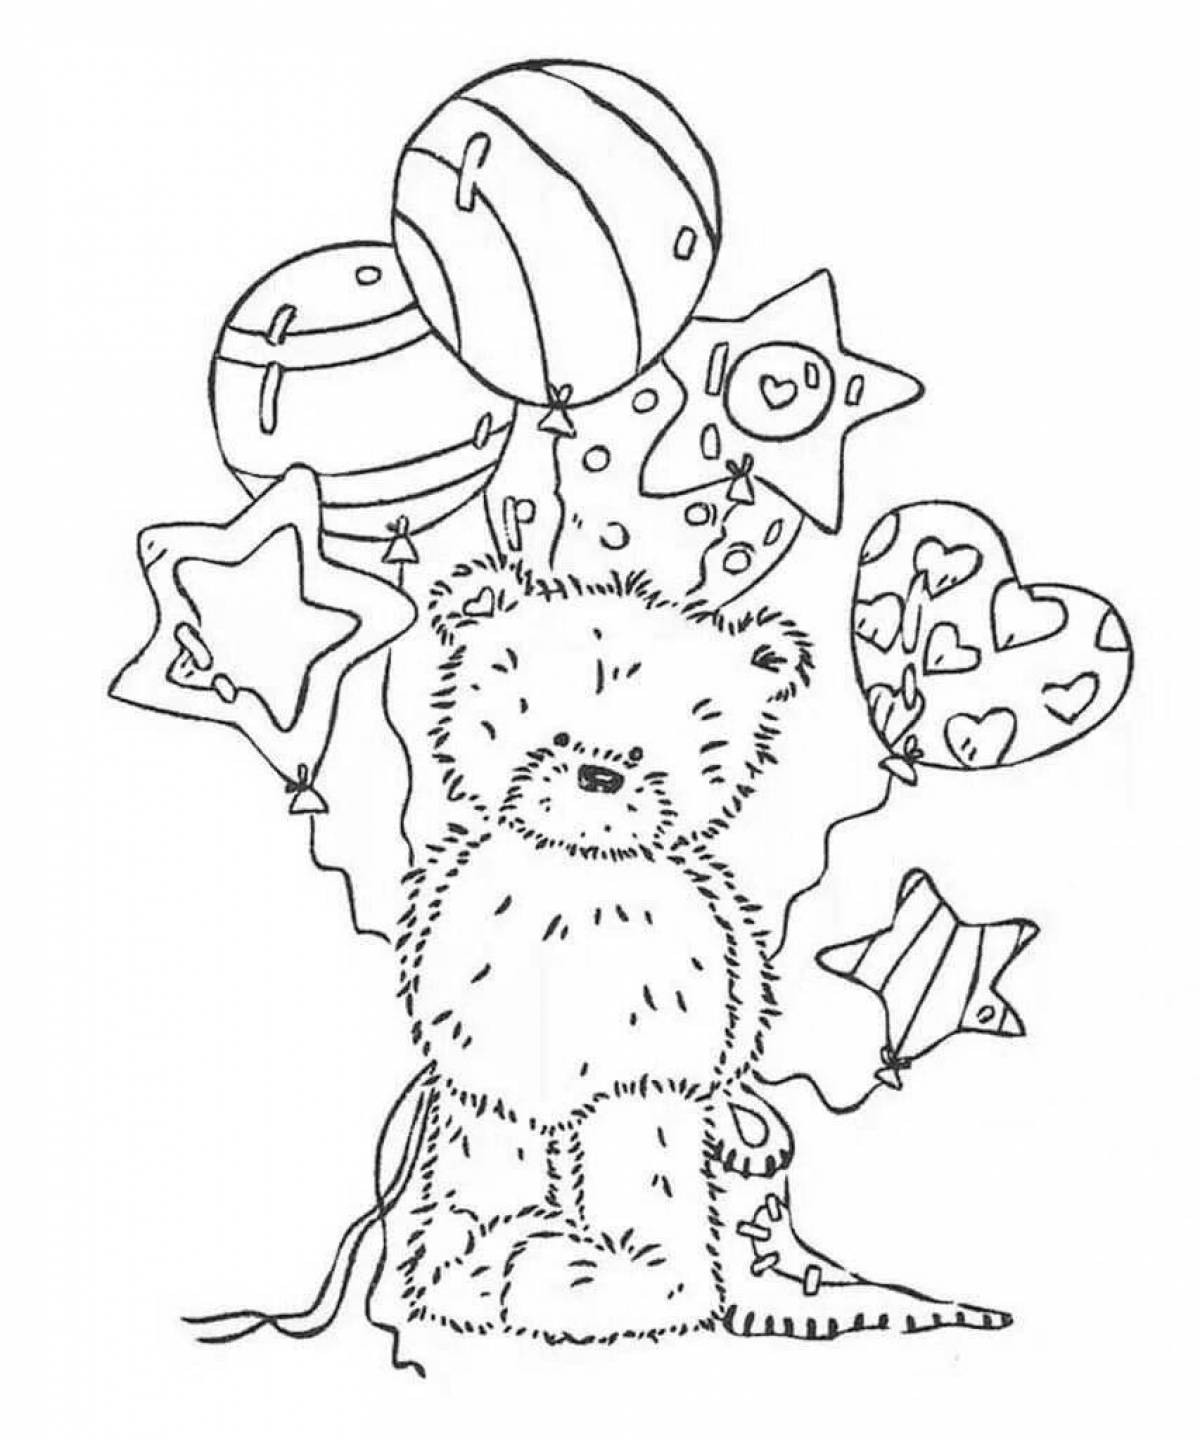 Coloring page charming teddy